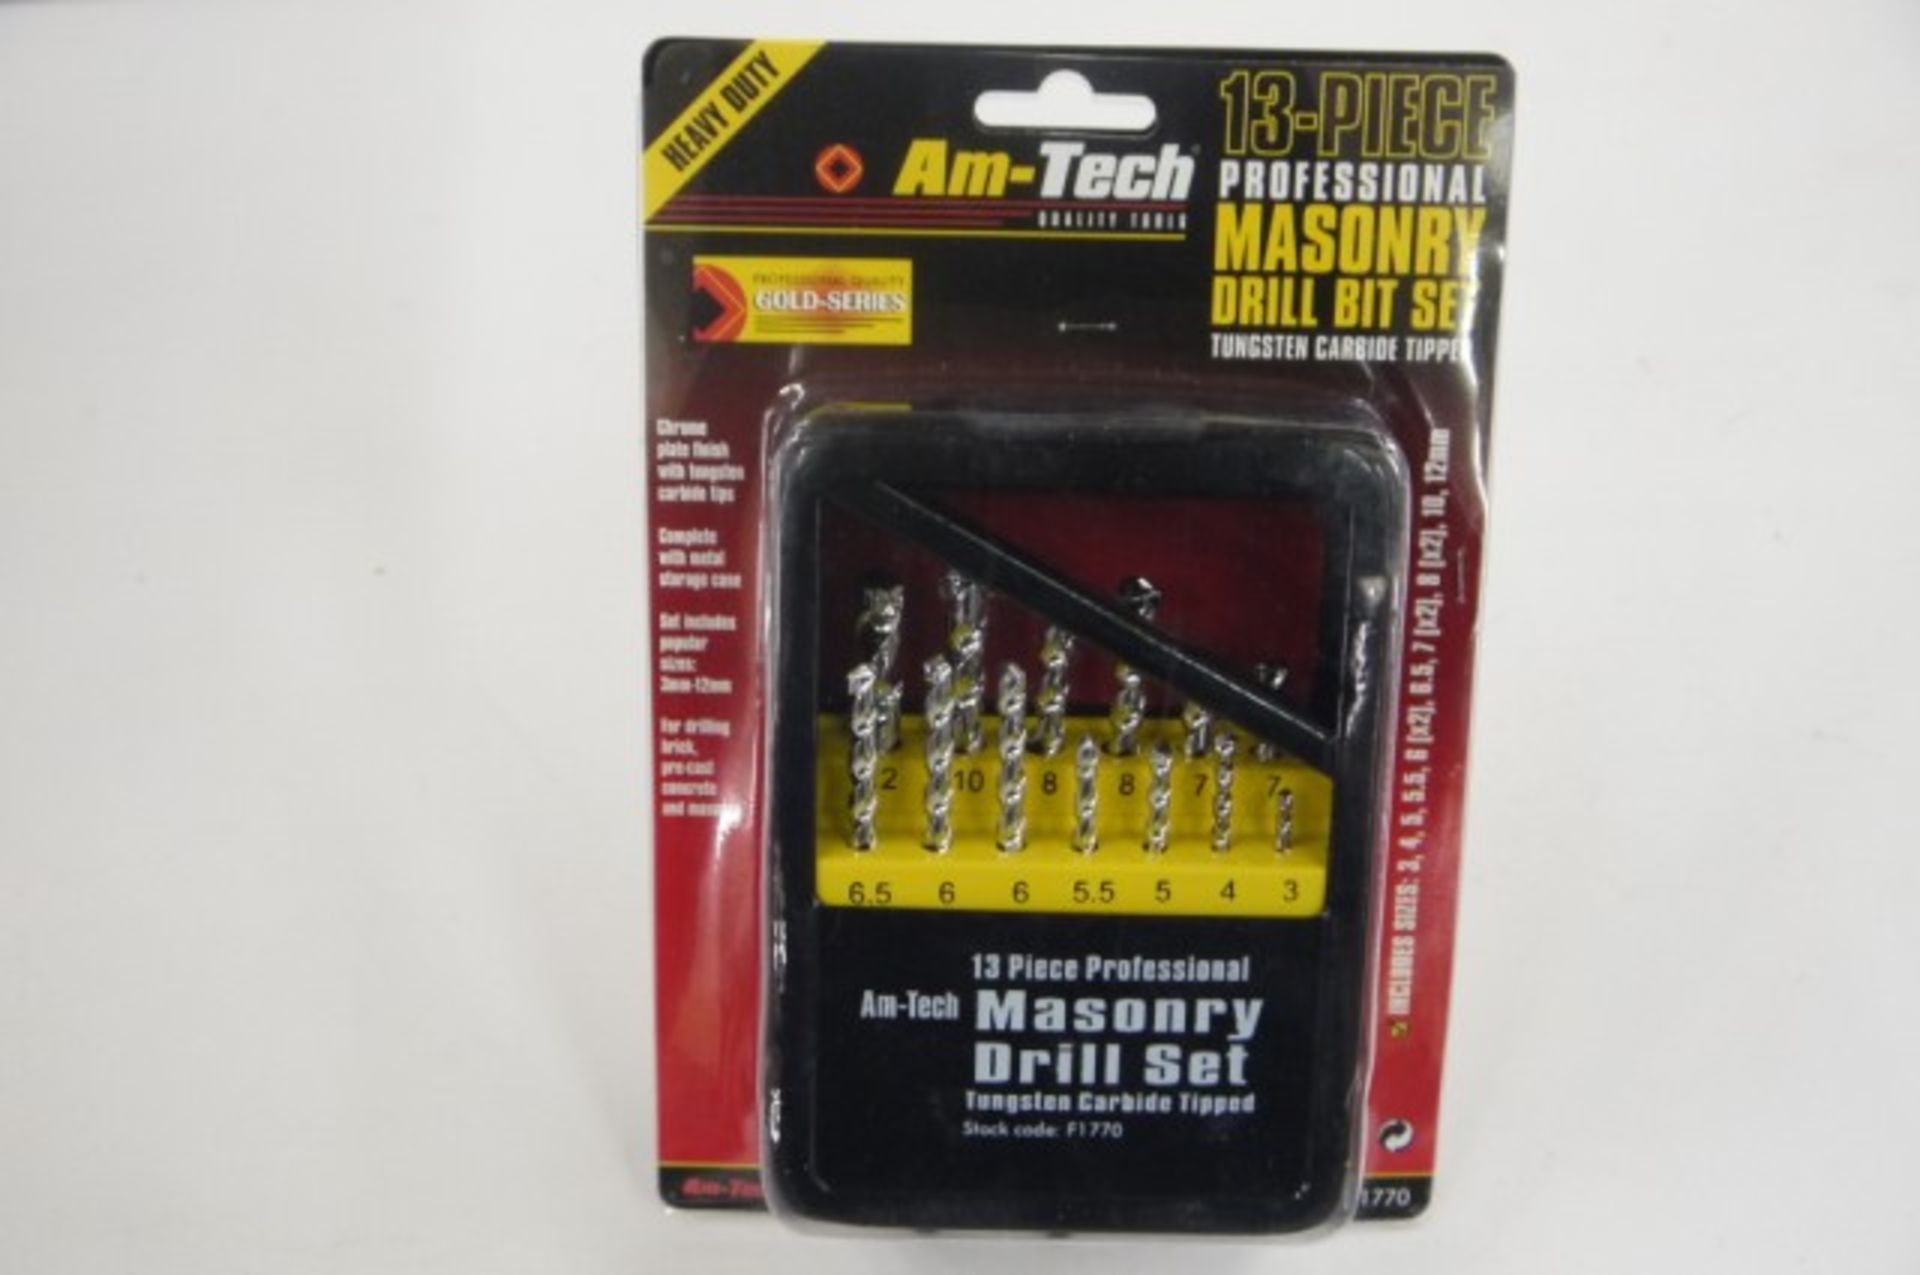 V Brand New Thirteen Piece Professional Masonry Drill Bit Set X 2 YOUR BID PRICE TO BE MULTIPLIED BY